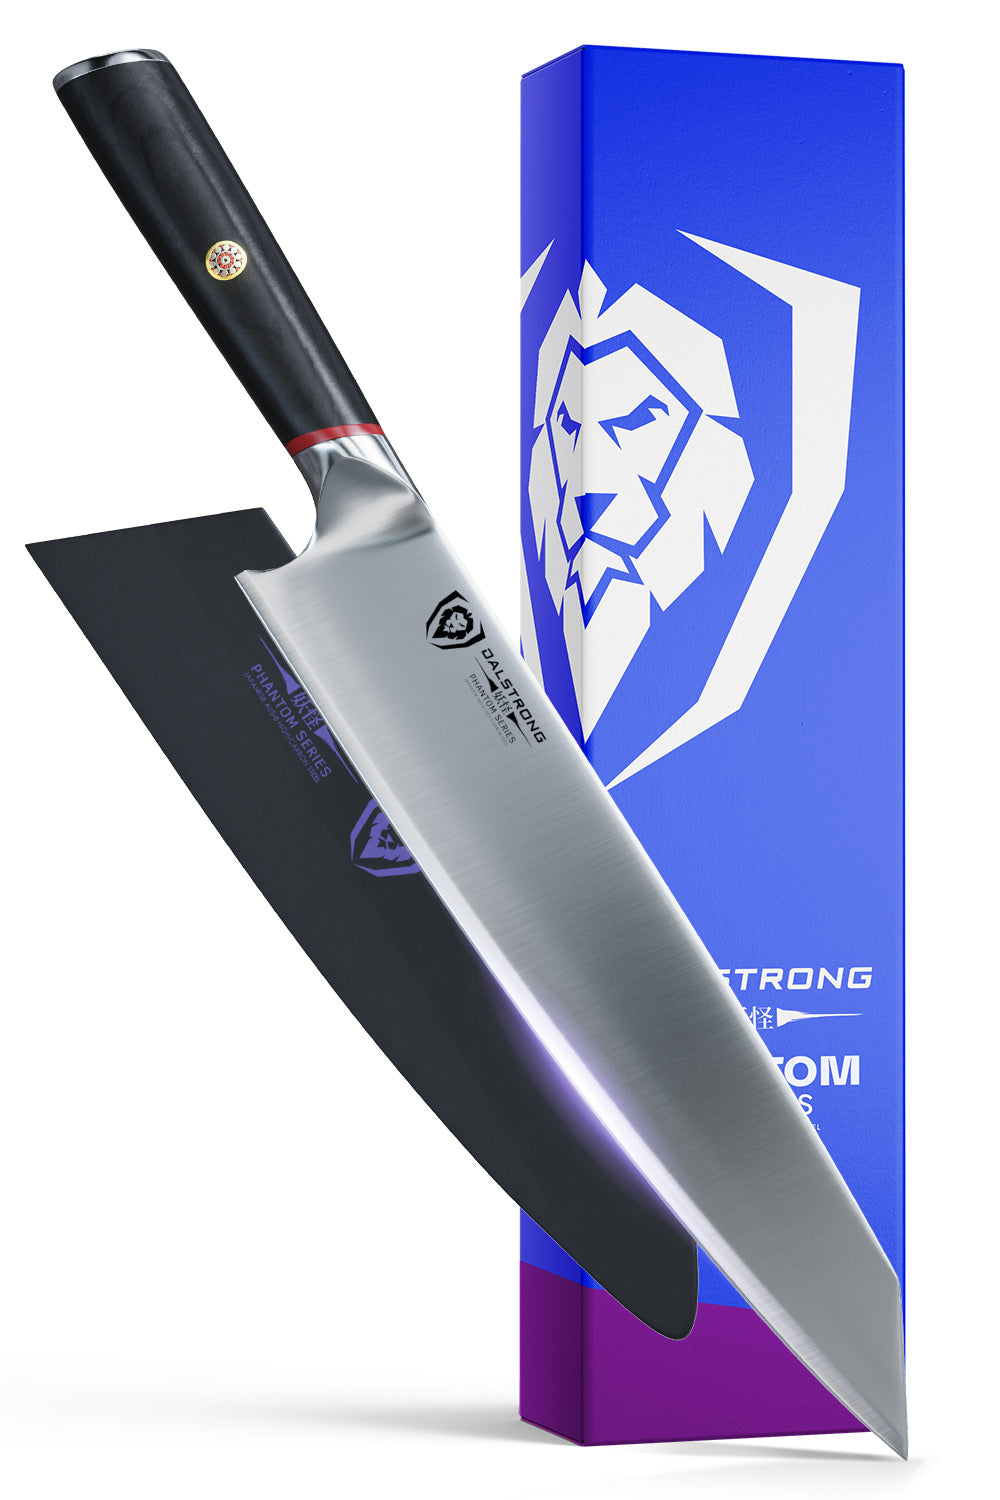 Dalstrong phantom series 9.5 inch chef knife in front of it's premium packaging.